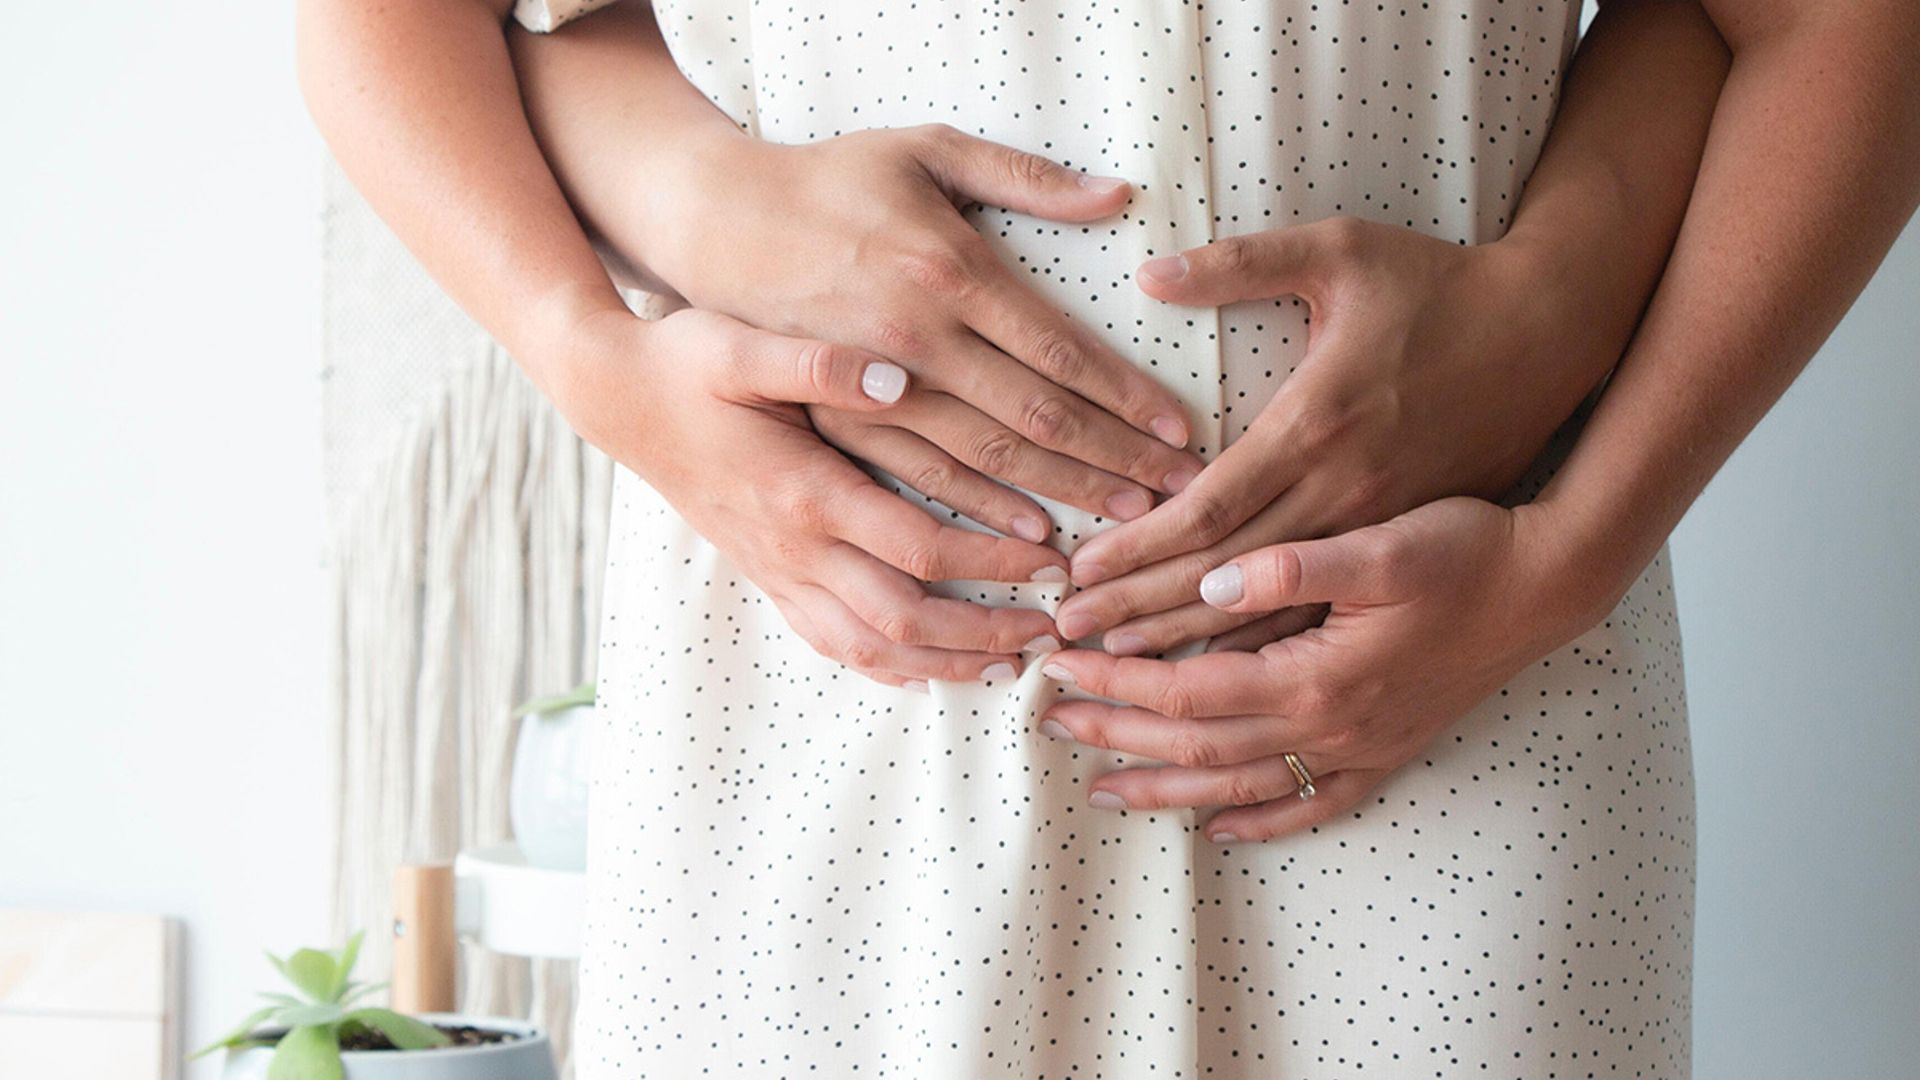 Everything you need to know about fertility tests at home